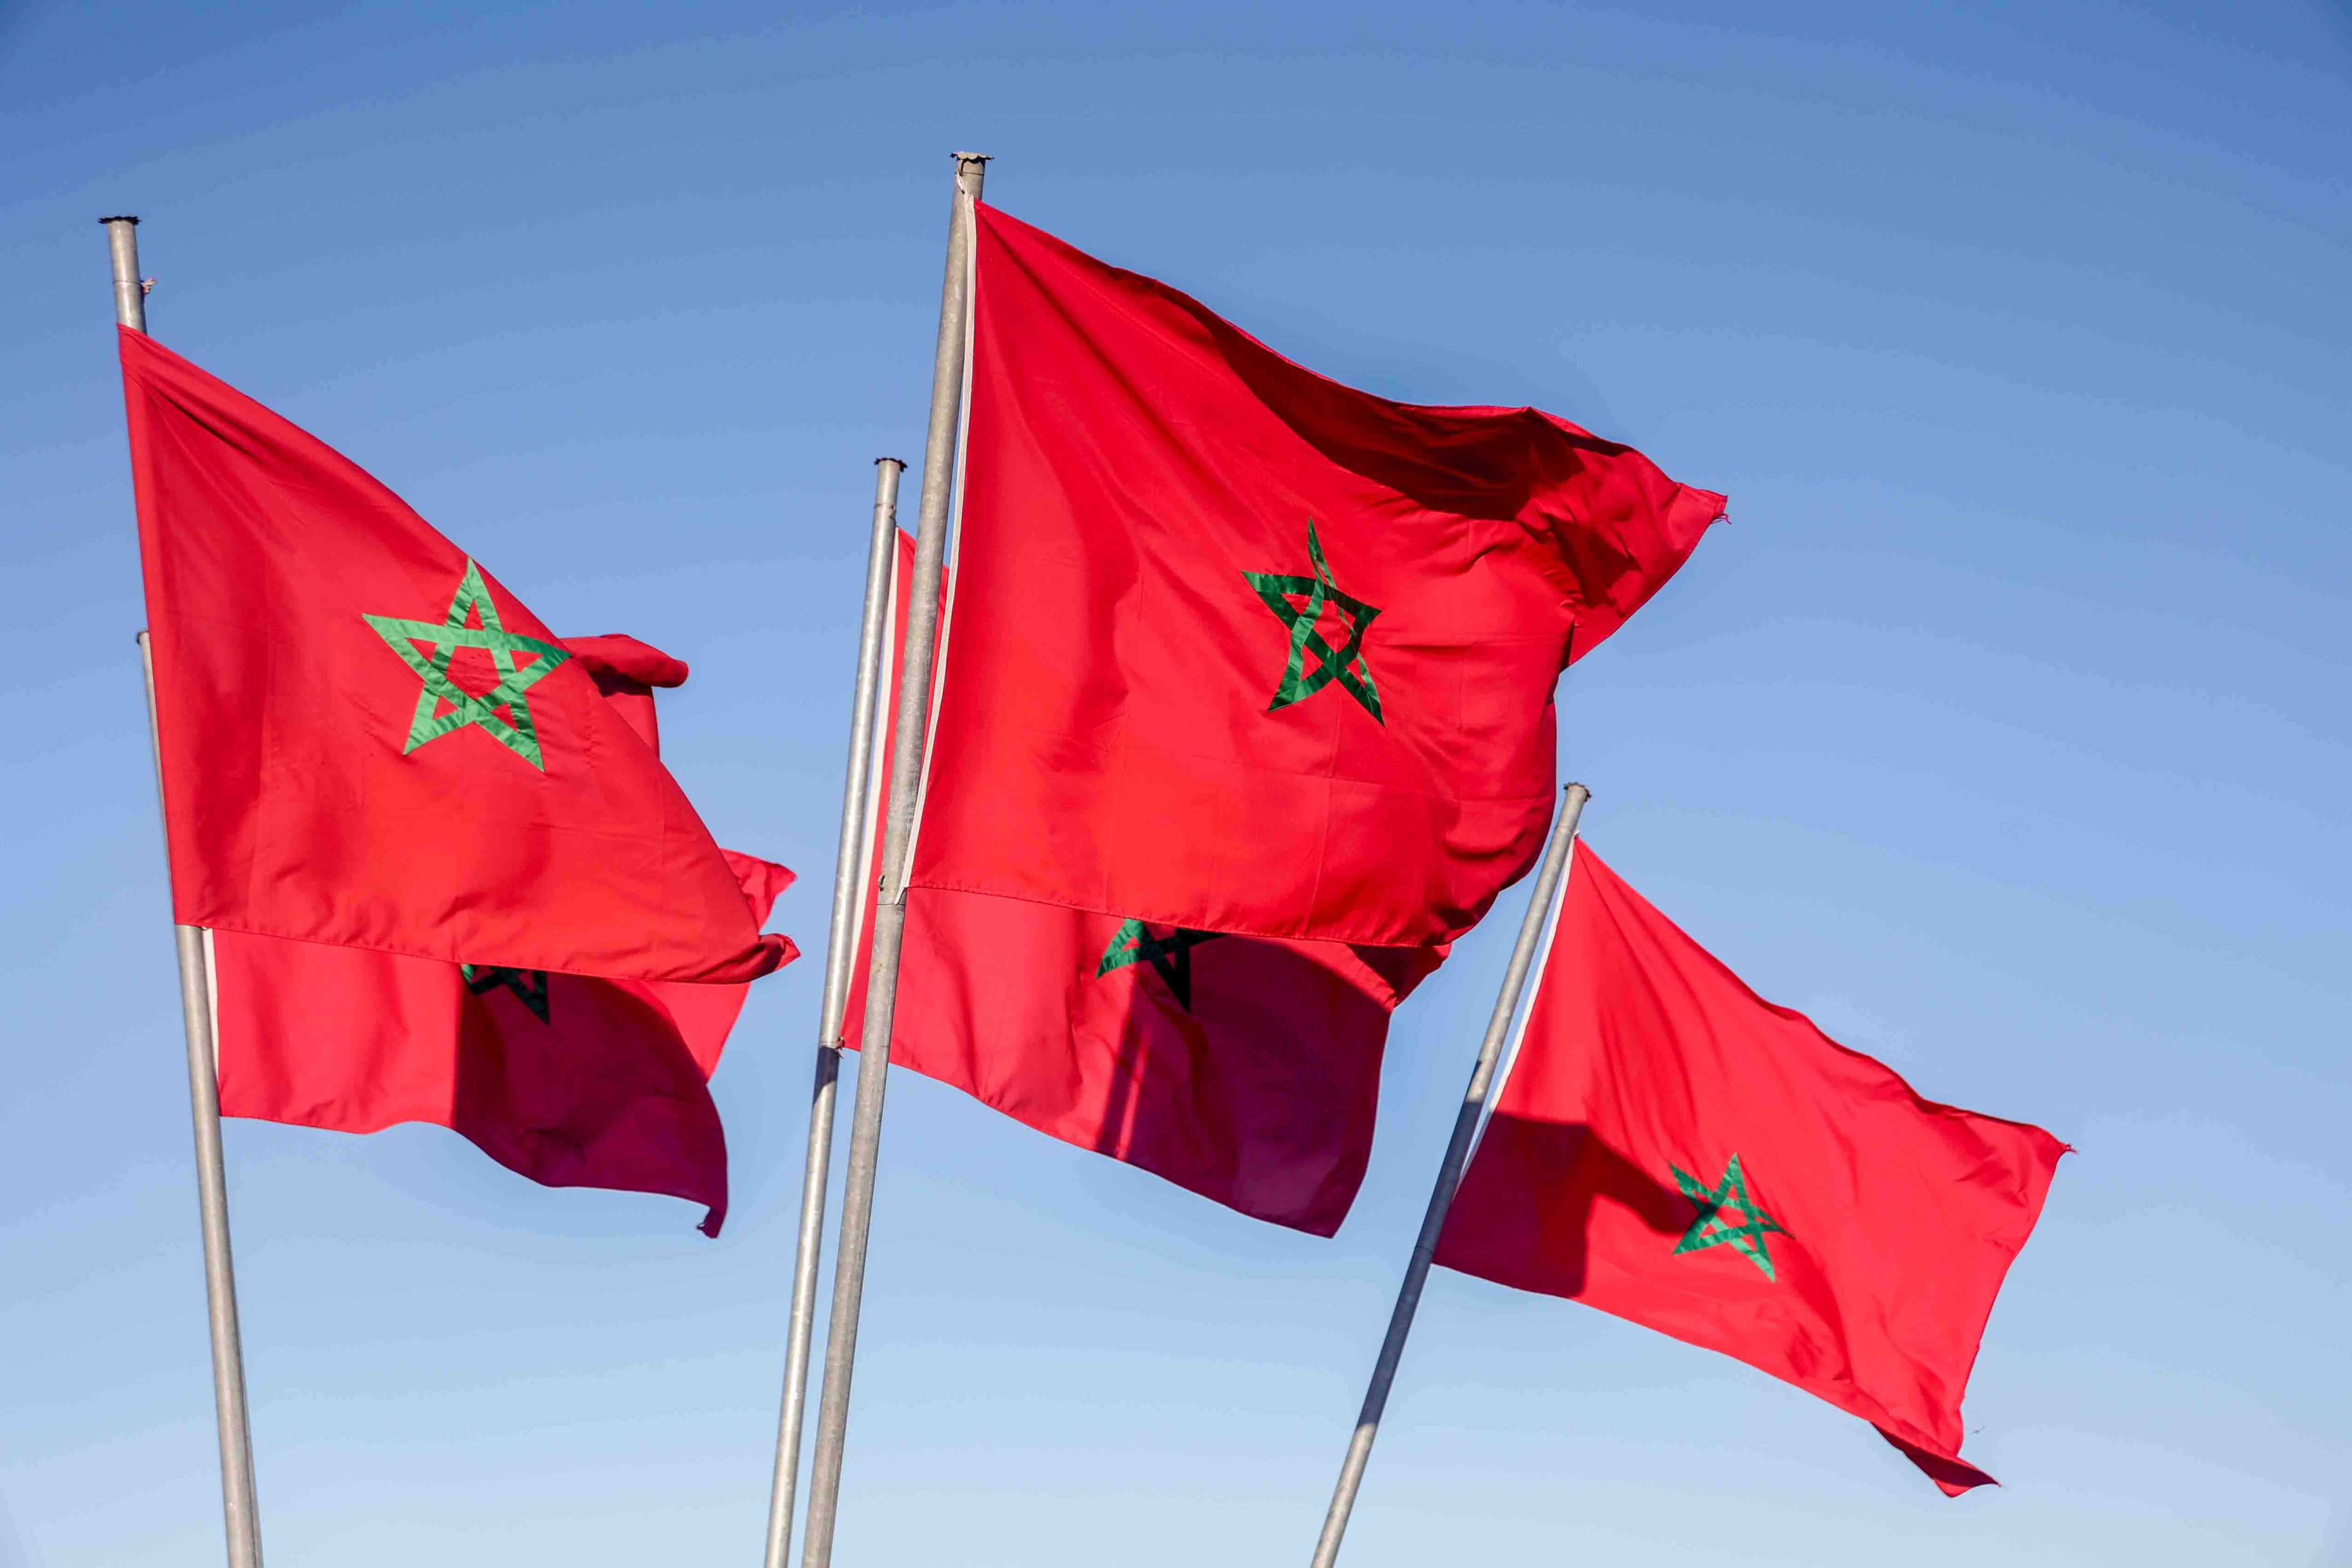 Morocco vs Spain at the World Cup 2022